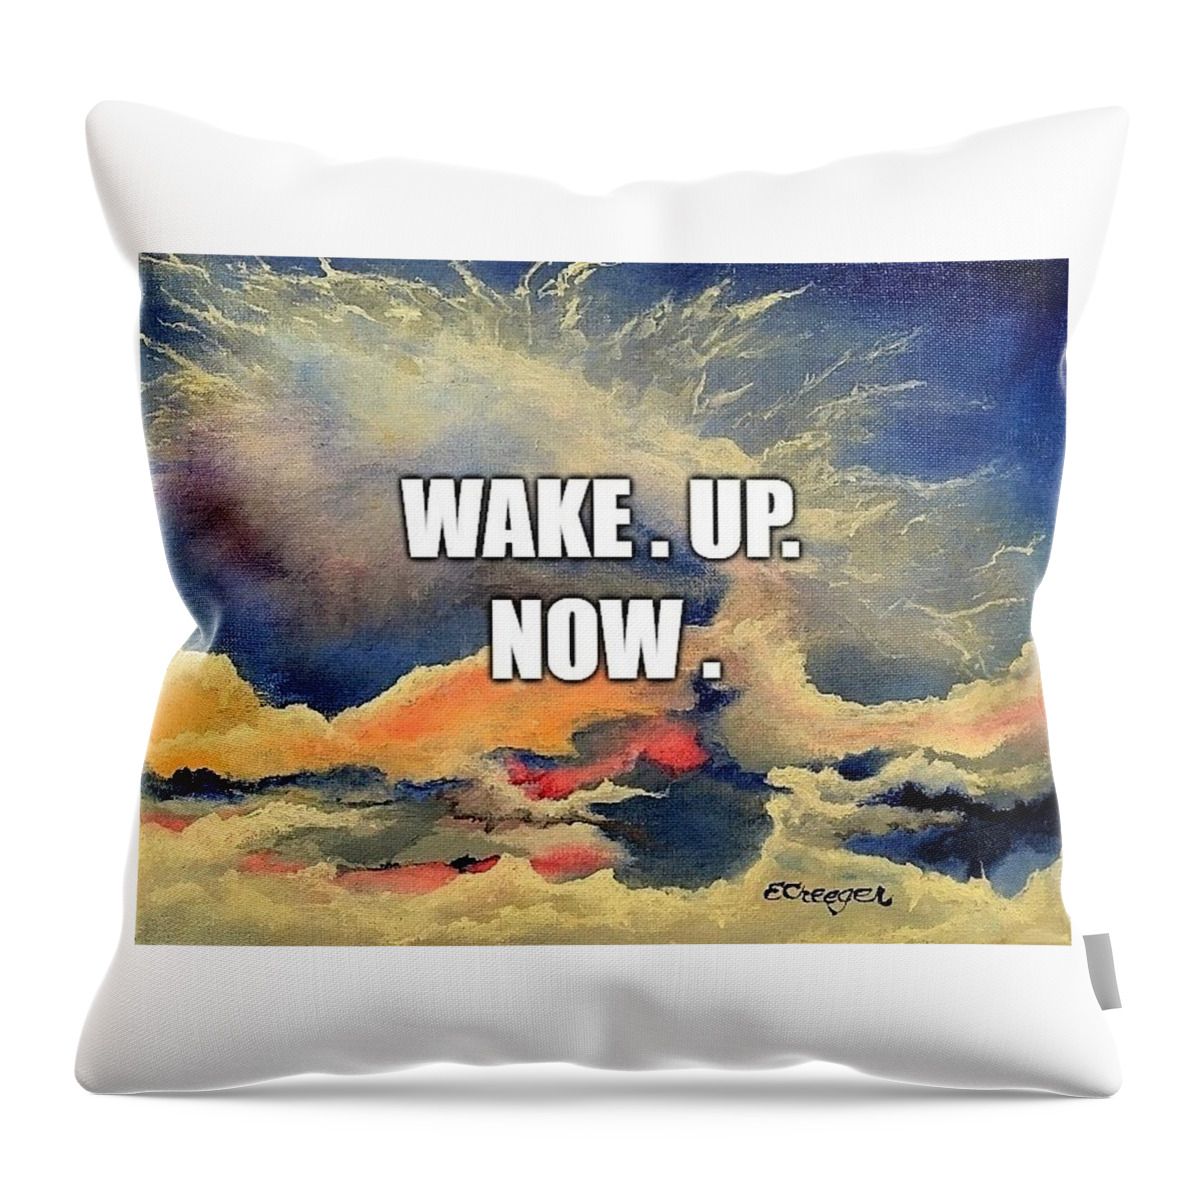 Awakened Throw Pillow featuring the painting Wake. Up. Now. by Esperanza Creeger